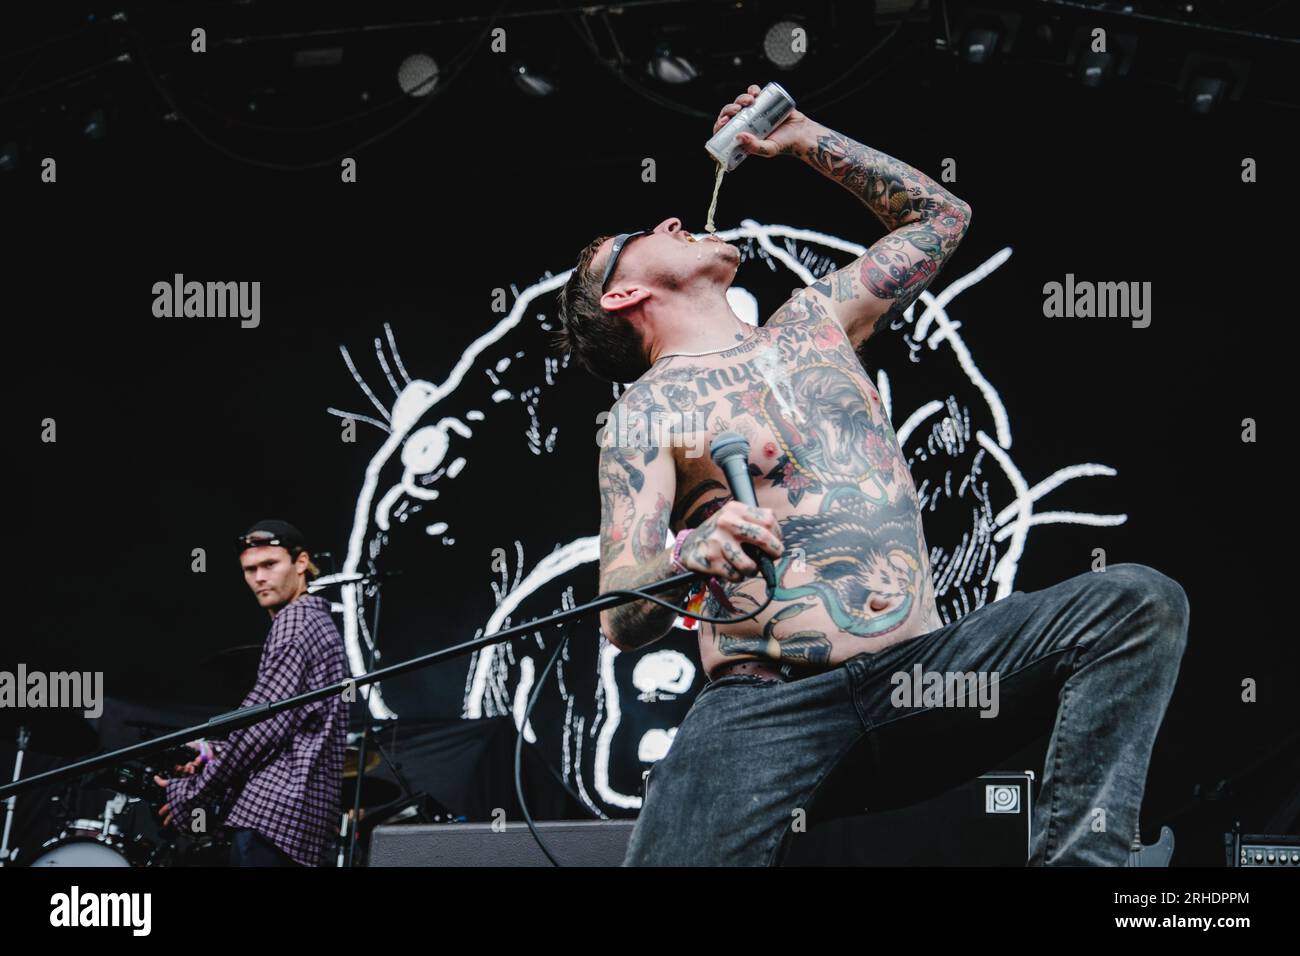 Gothenburg, Sweden. 12th, August 2023. The Swedish punk band Viagra Boys performs a live concert during the Swedish music festival Way Out West 2023 in Gothenburg. Here vocalist Sebastian Murphy is seen live on stage. (Photo credit: Gonzales Photo - Tilman Jentzsch). Stock Photo